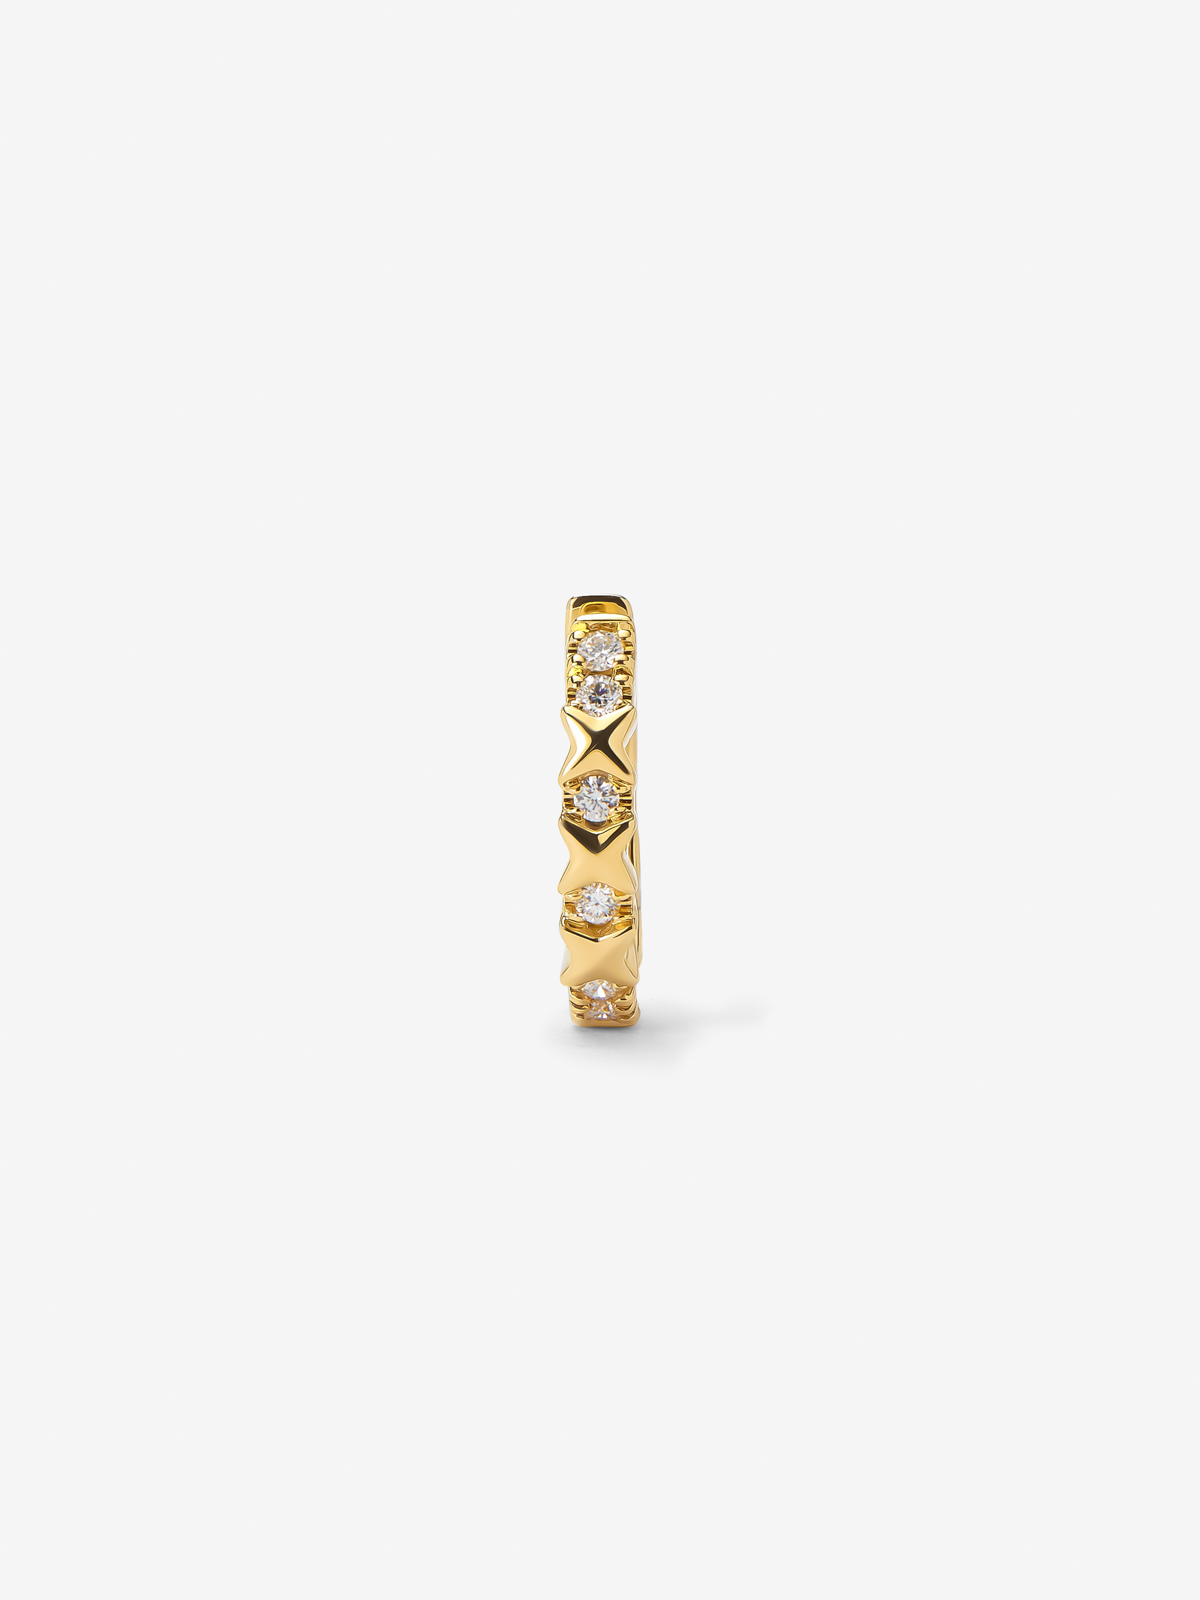 Individual 18K yellow gold hoop earring with 6 brilliant-cut diamonds with a total of 0.04 cts